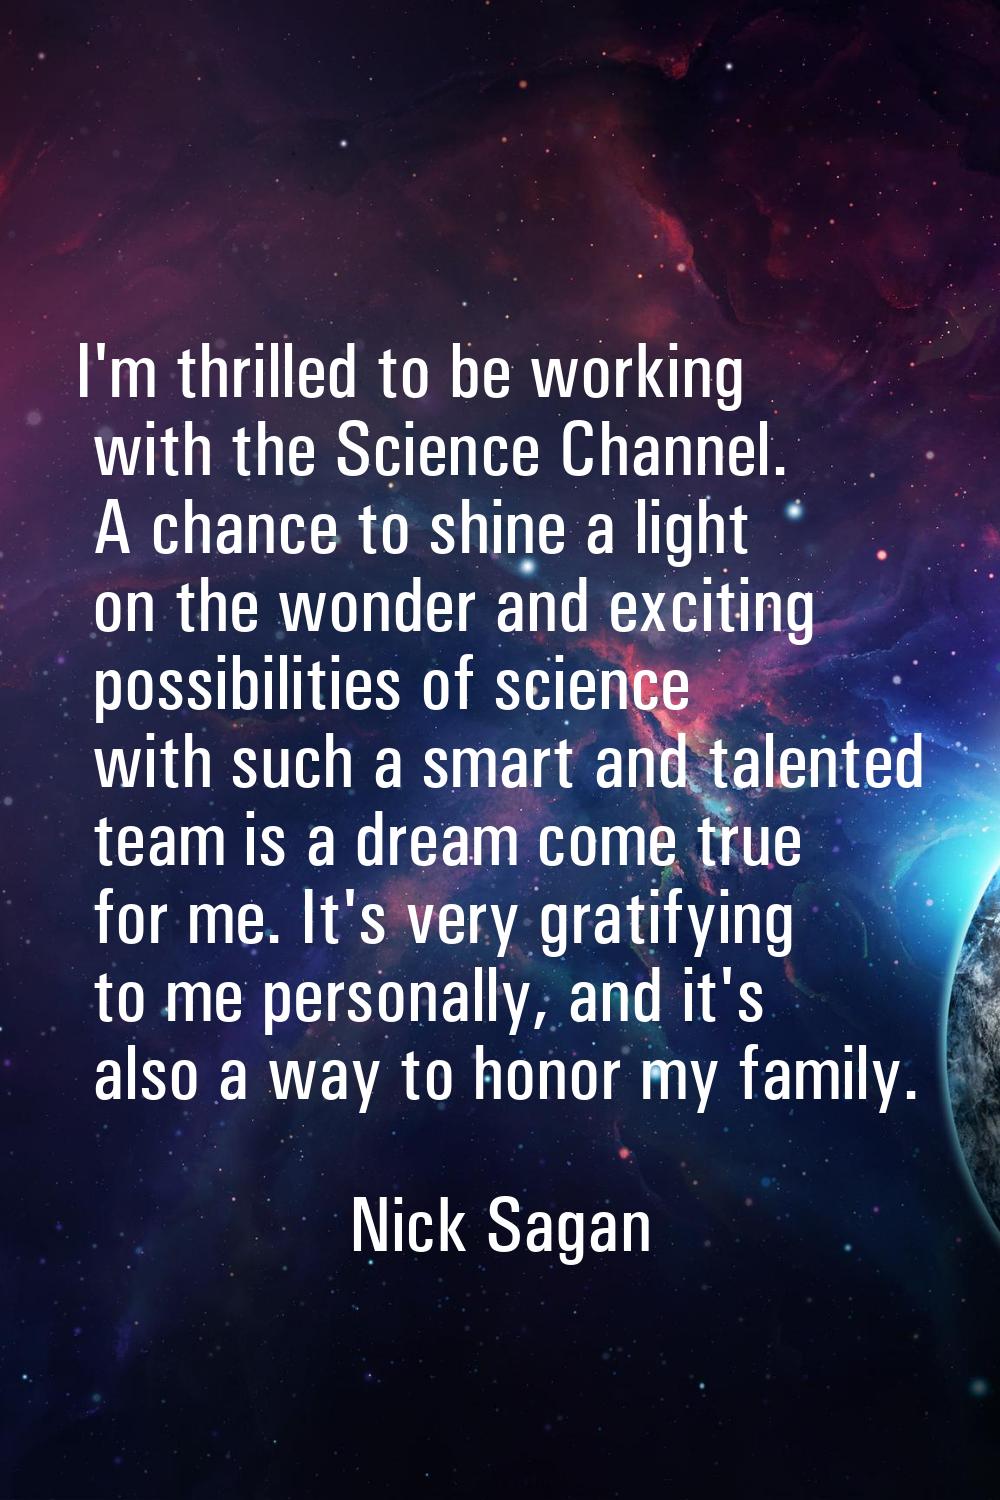 I'm thrilled to be working with the Science Channel. A chance to shine a light on the wonder and ex